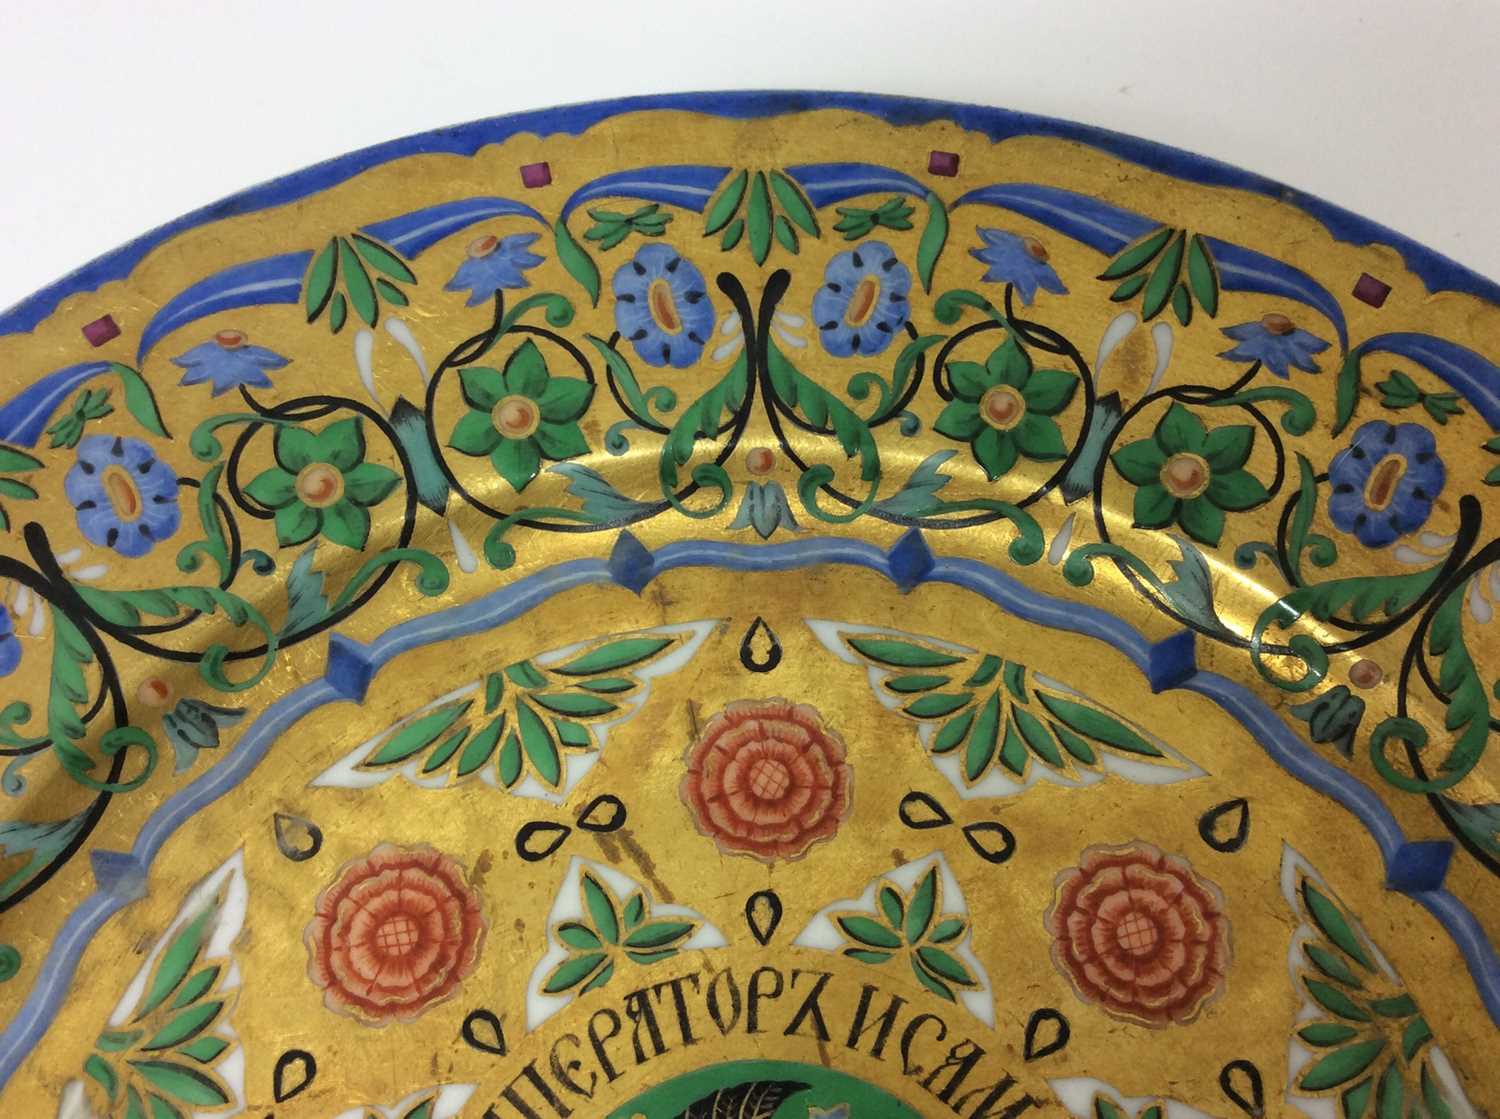 Fine and rare Imperial Russian porcelain plate made for Tsar Nicholas I from the Great Kremlin Palac - Image 6 of 11